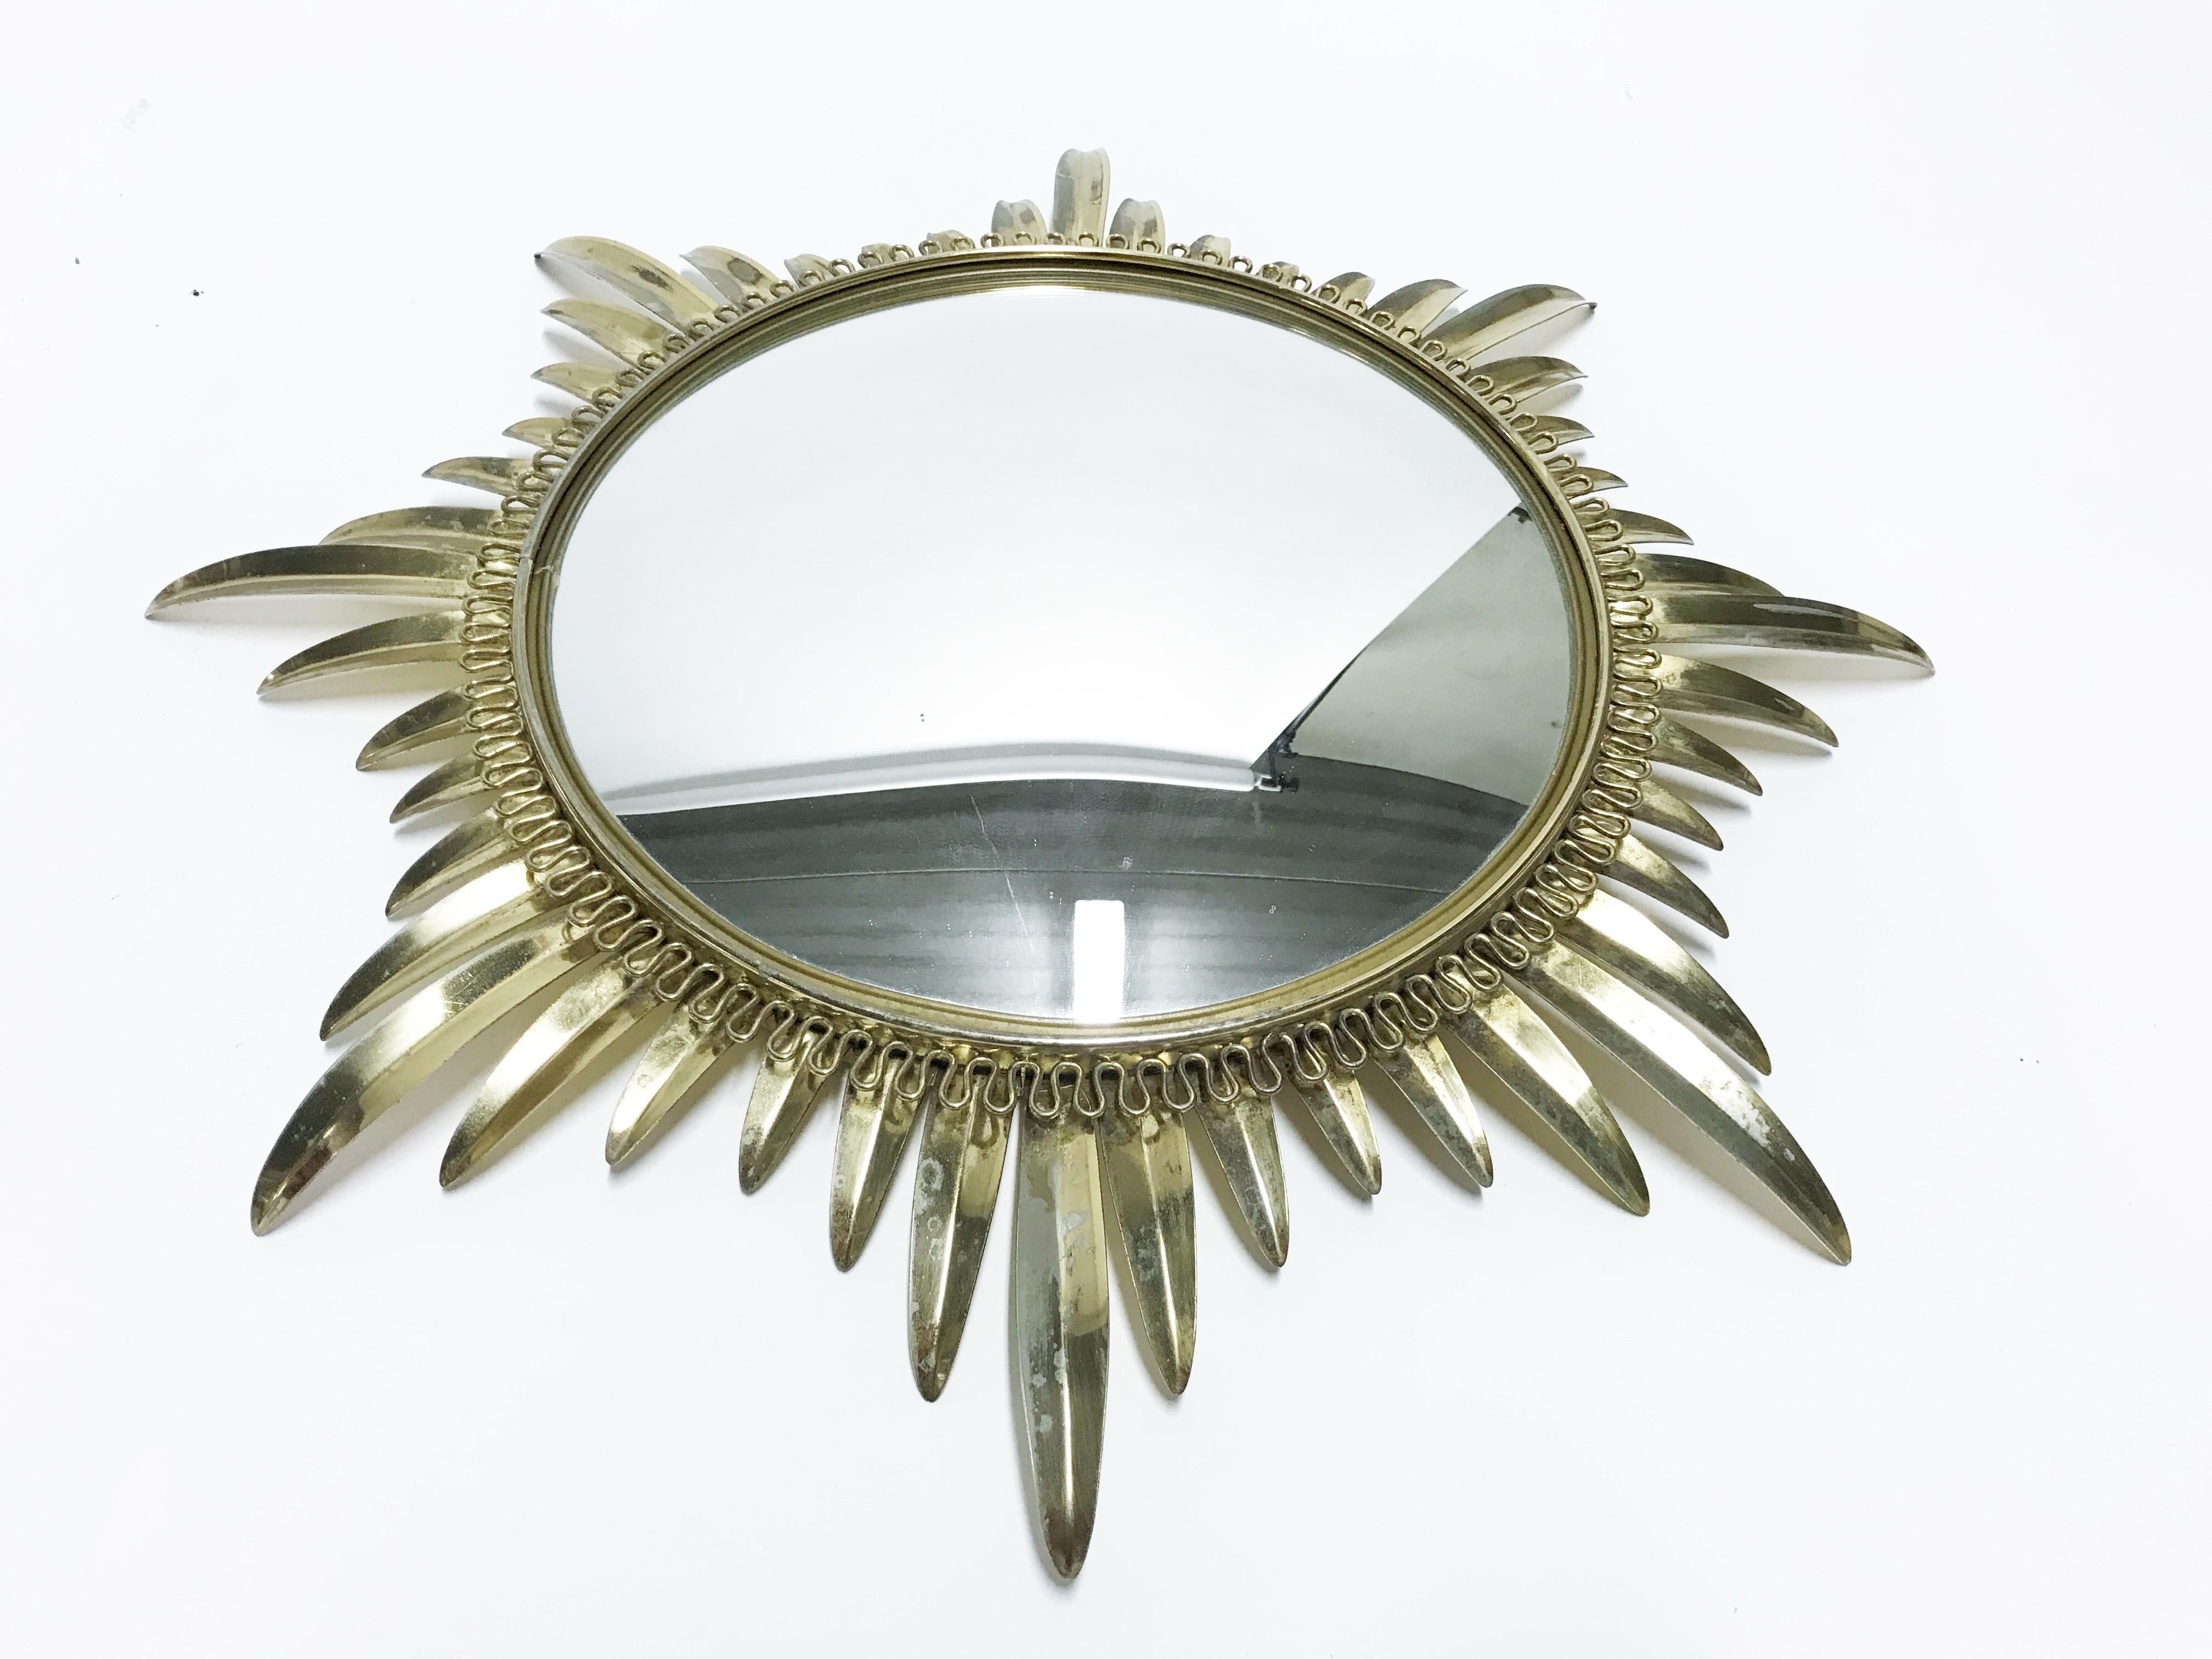 Brass convex sunburst mirror with uneven sunrays.

The golden mirror is in a very good condition with a beautiful patina.

Great as a single piece or to add to a collection to fill the wall!

1960s, France

Pristine